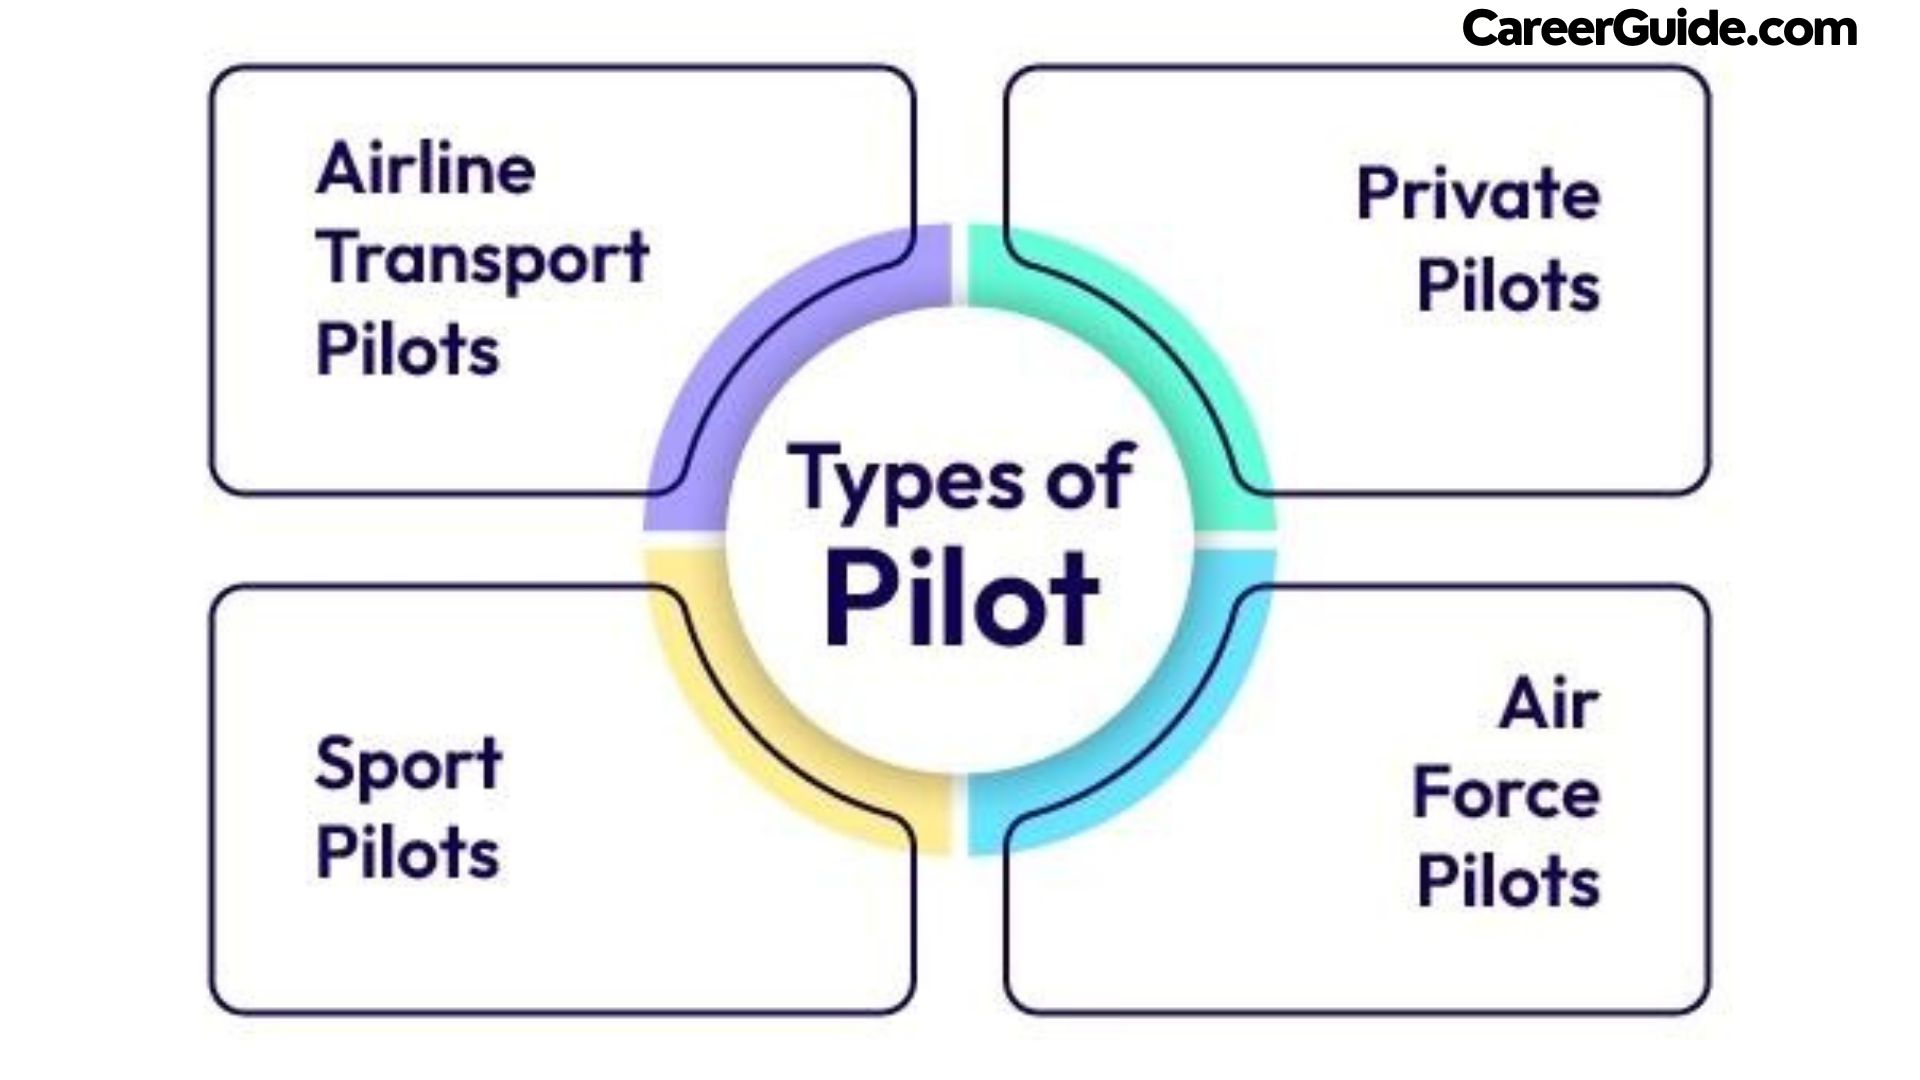 Can a Commerce Student Become a Pilot